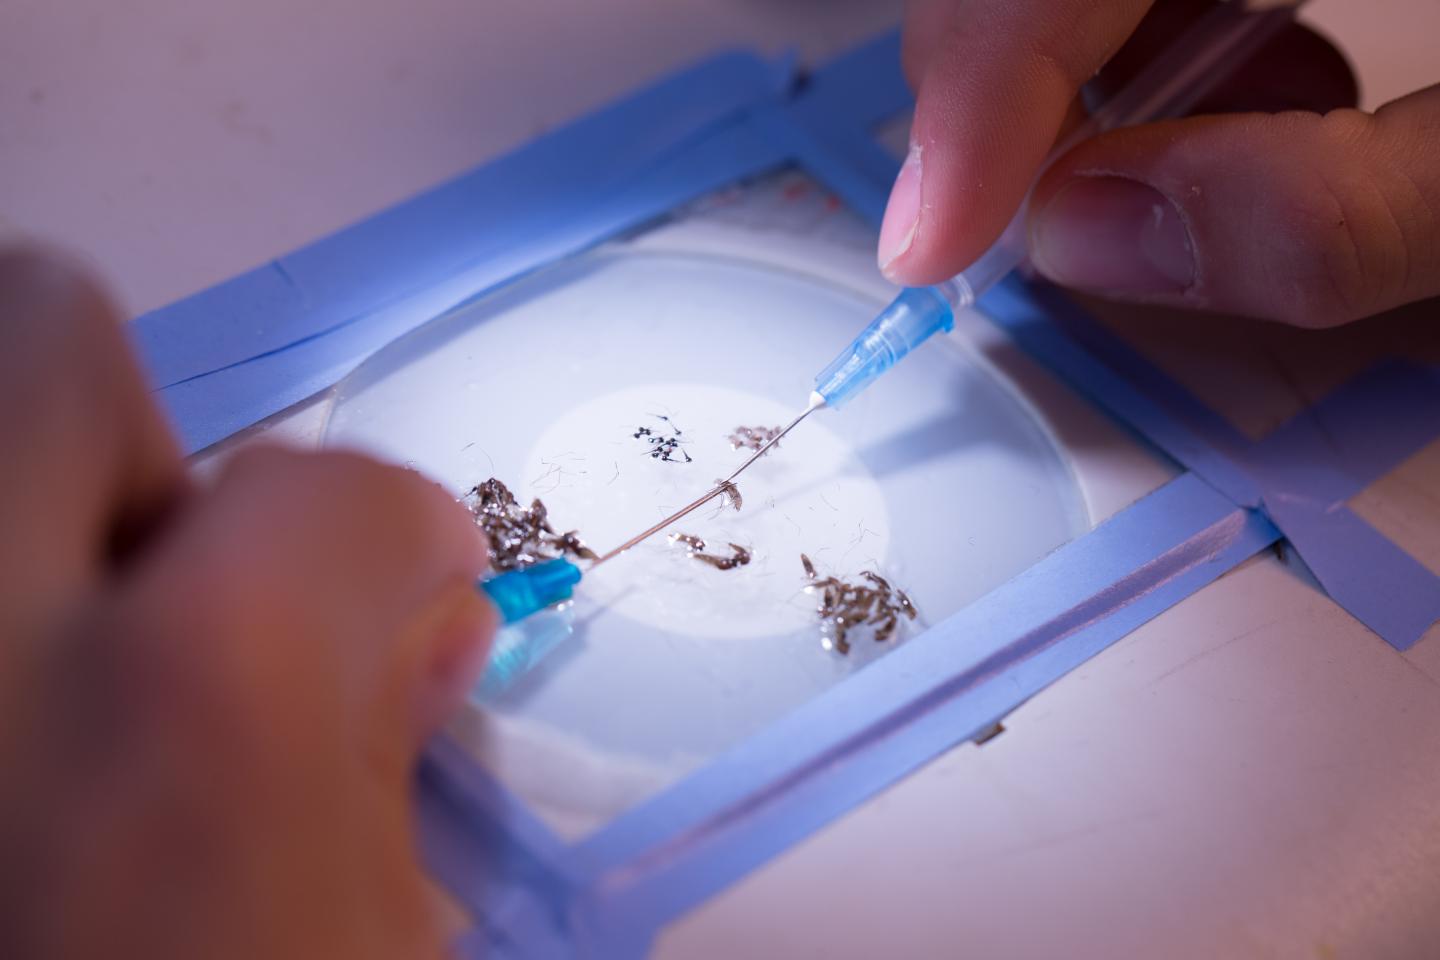 Dissecting Malaria Infected Mosquitos